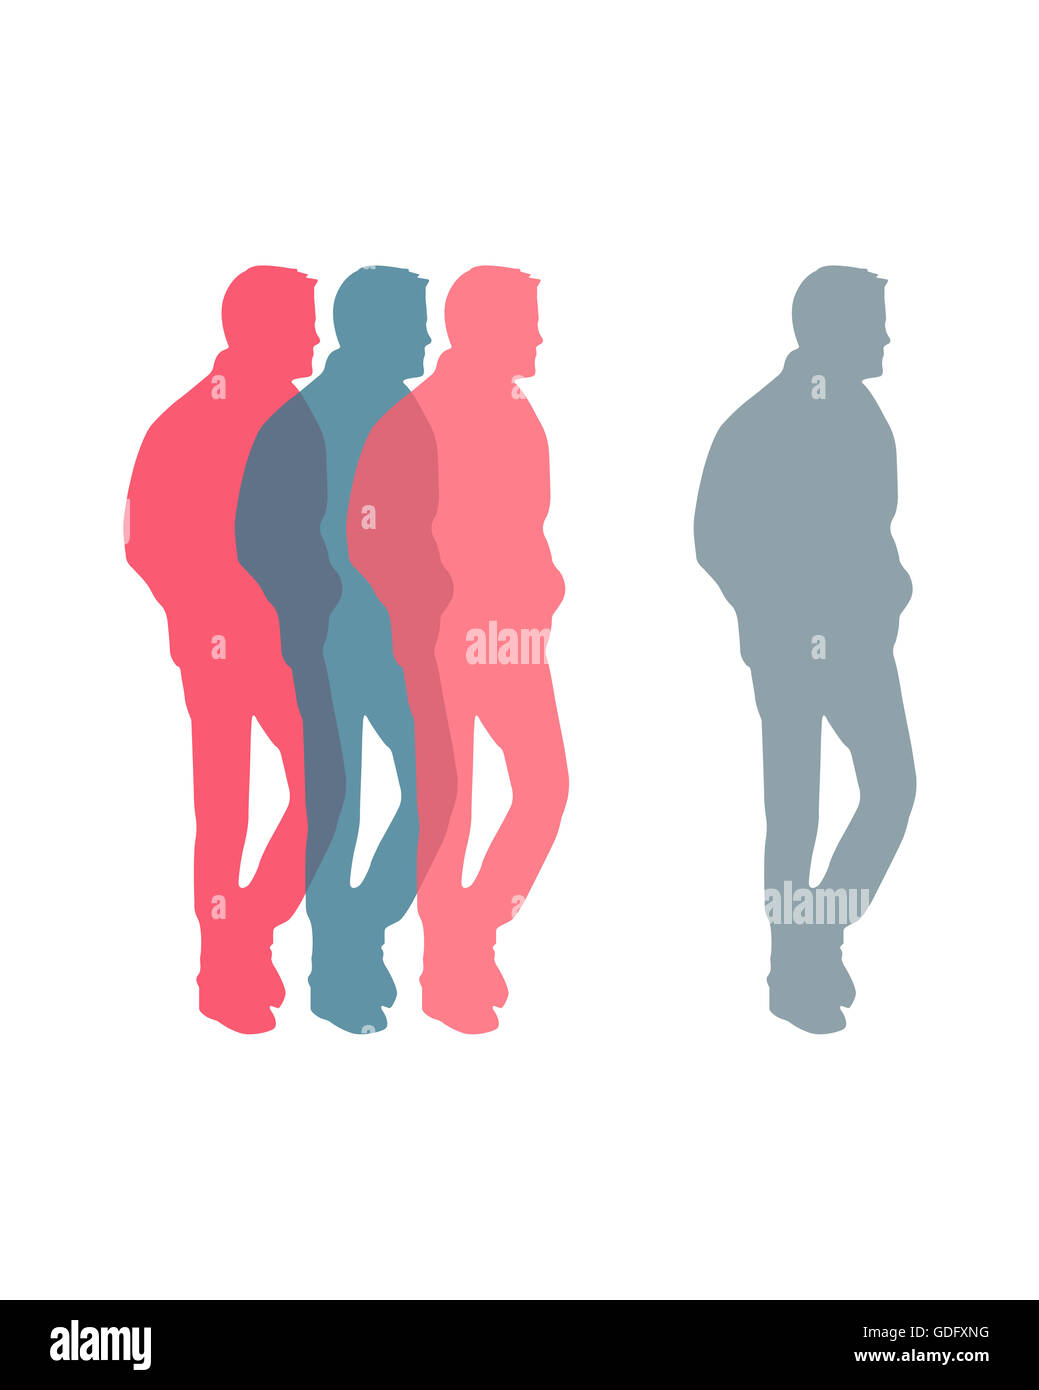 Illustration or drawing of men silhouettes Stock Photo